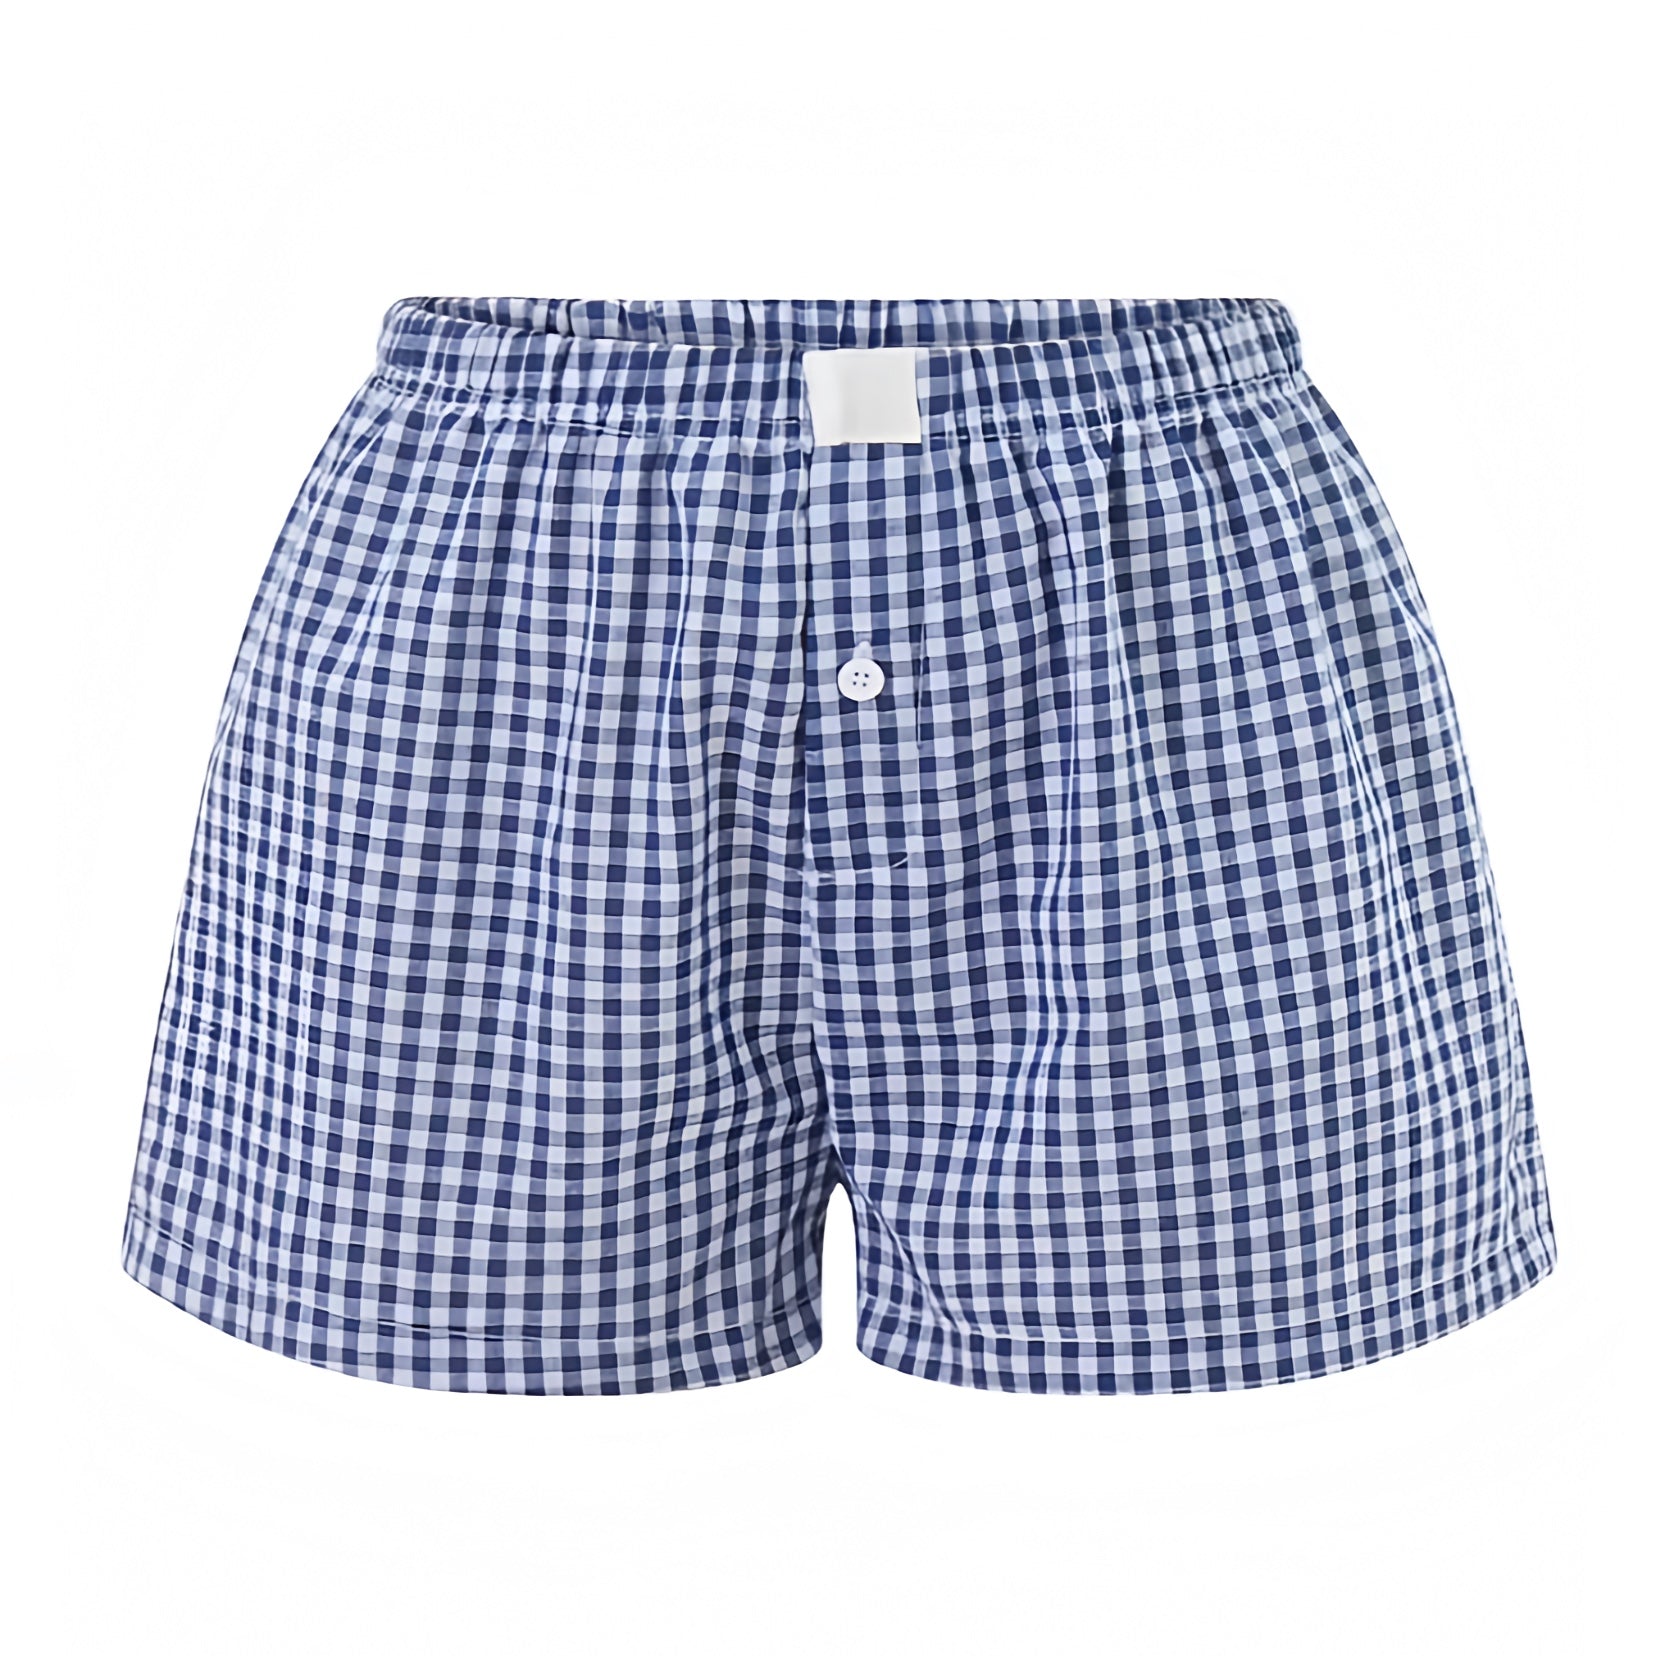 dark-navy-blue-and-white-gingham-checkered-plaid-striped-seersucker-patterned-linen-cotton-light-weight-mid-low-rise-waisted-button-down-fitted-waist-sweat-short-mini-shorts-comfy-cozy-lounge-attire-women-ladies-chic-trendy-spring-2024-summer-casual-feminine-beach-wear-preppy-style-coastal-granddaughter-brandy-melville